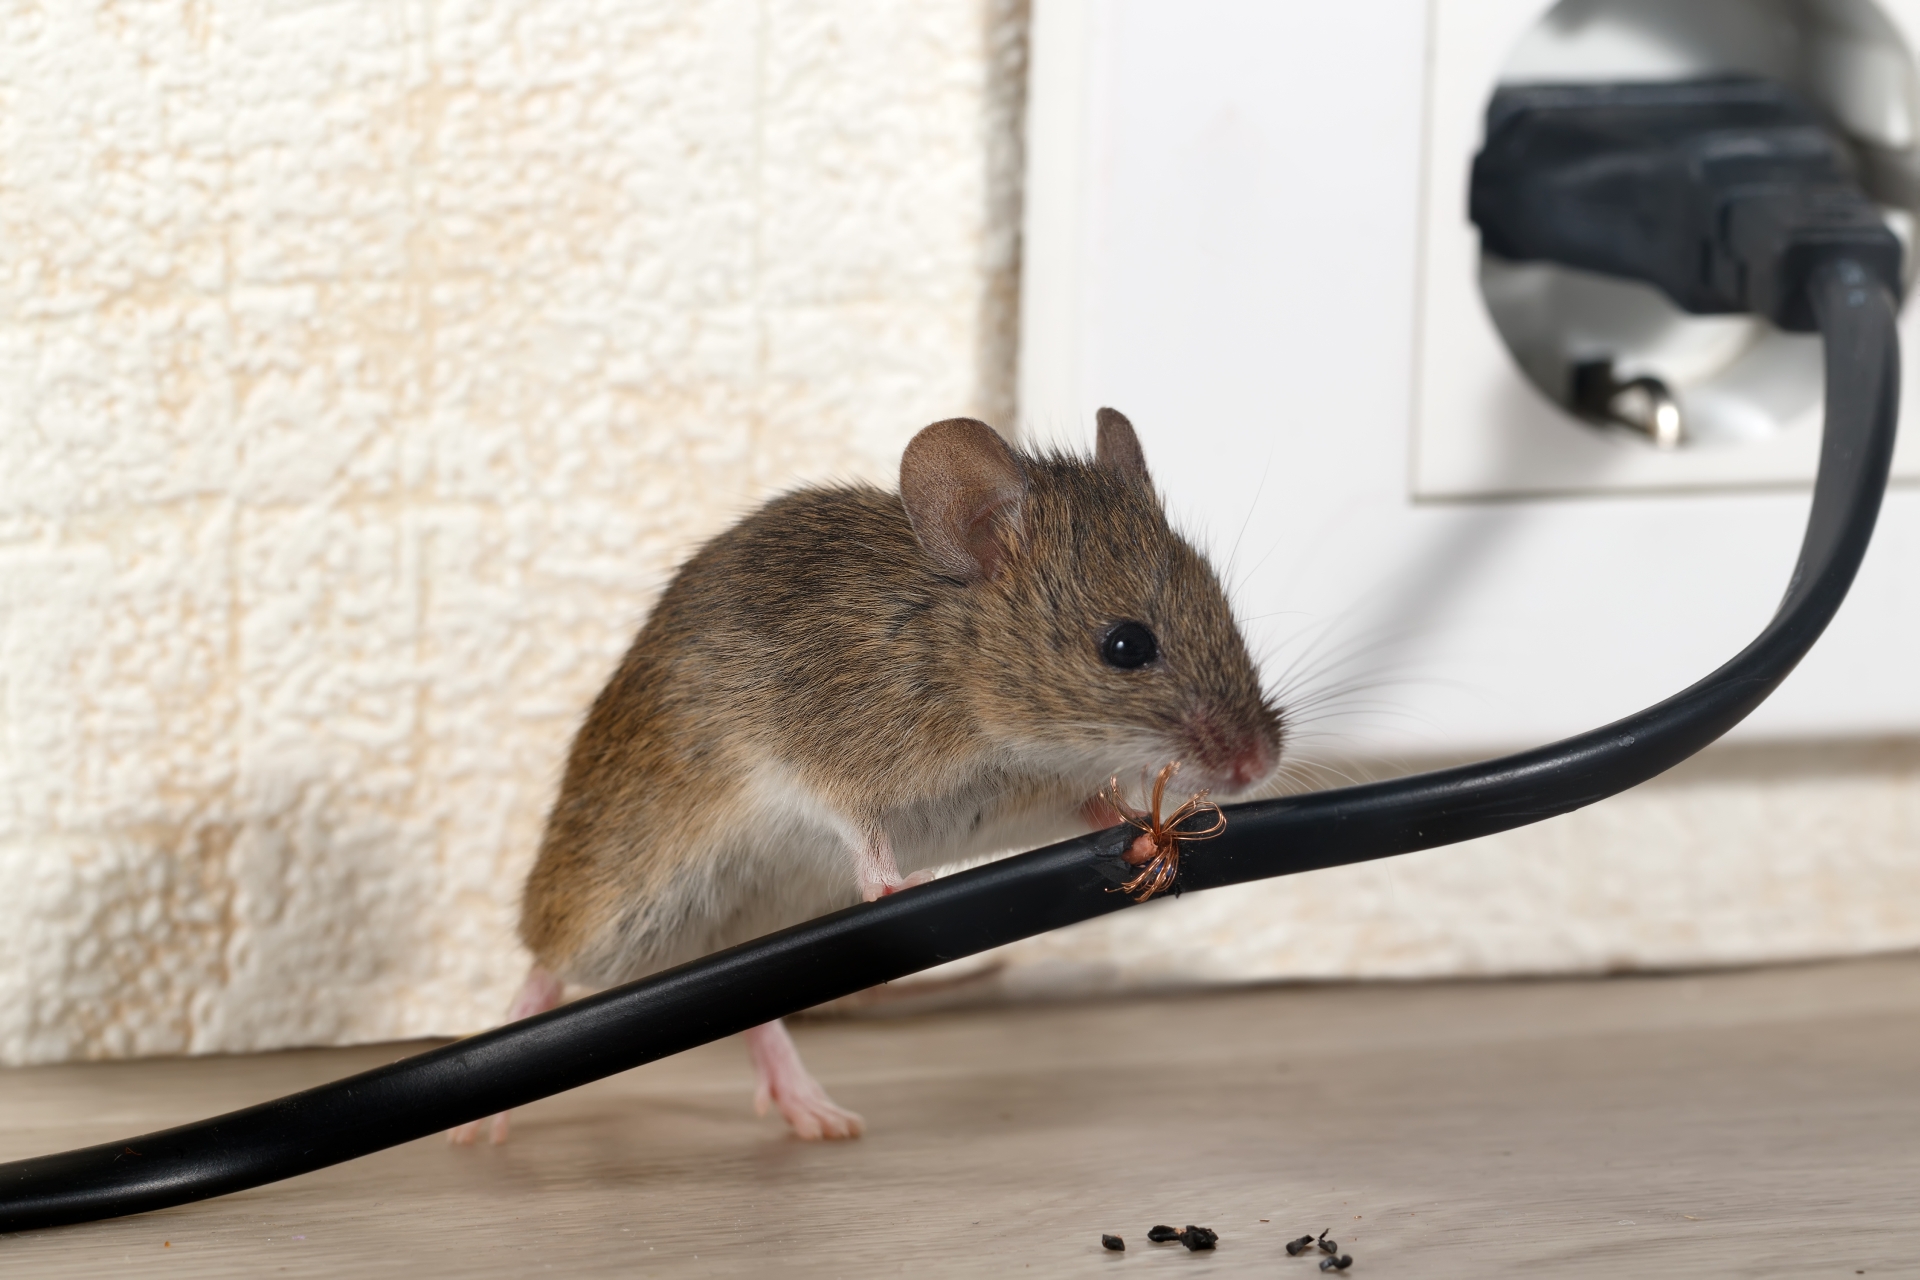 Mice Infestation, Pest Control in Loughton, High Beach, IG10. Call Now 020 8166 9746